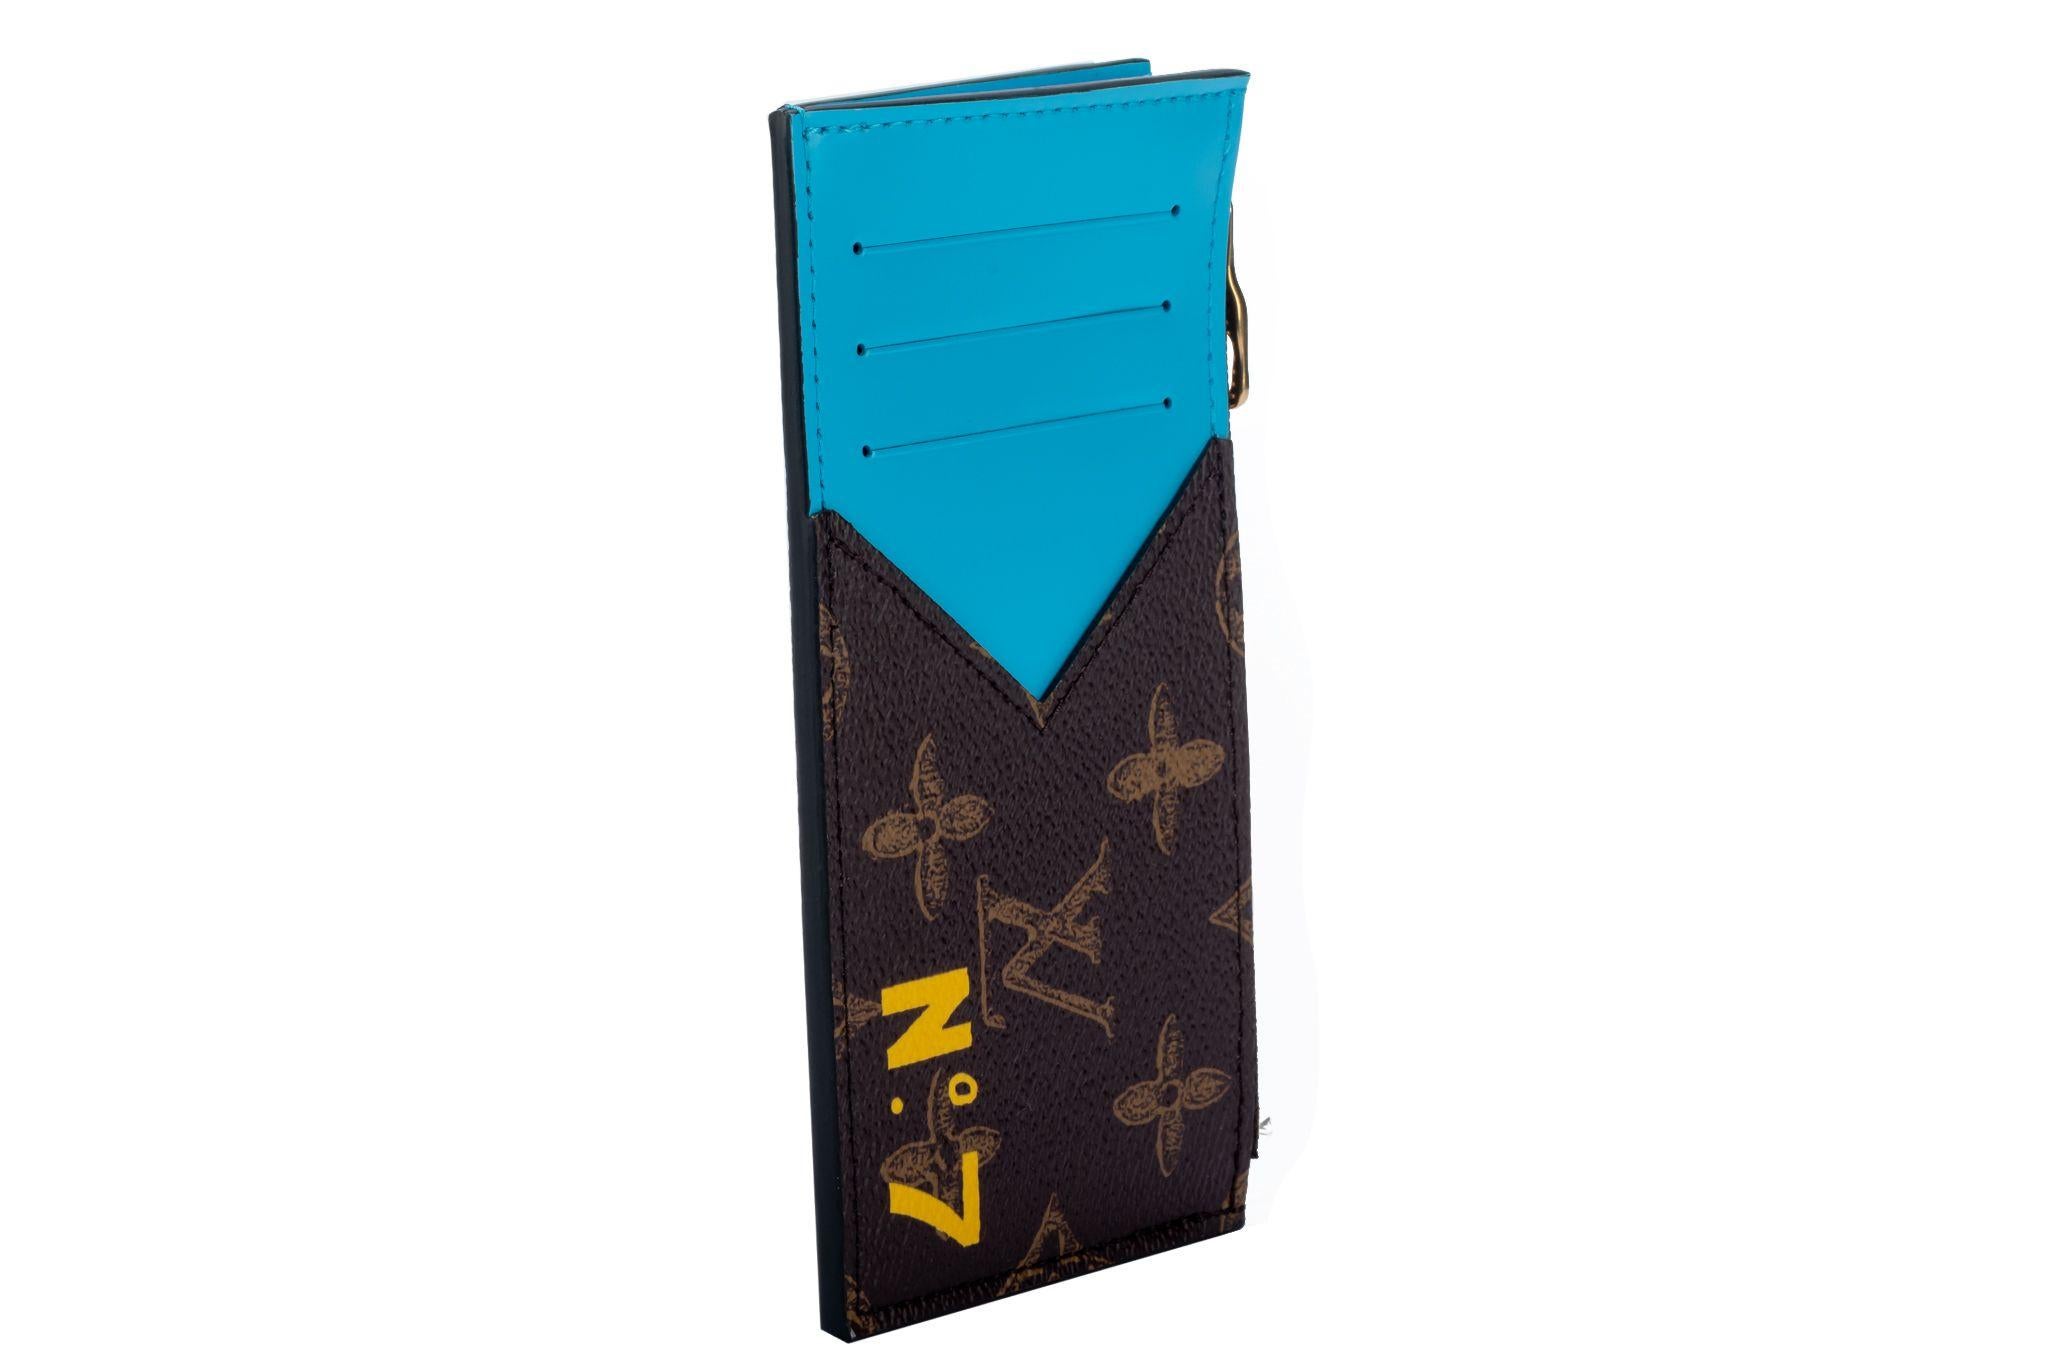 Virgil Abloh brings his Trunk L’Œil animation to the Coin Card Holder in Monogramed coated canvas, with the Monogram Flowers and LVs rendered in a slightly low-tech aspect reminiscent of the treatment on old trunks. The “N°7” is a nod to Abloh’s